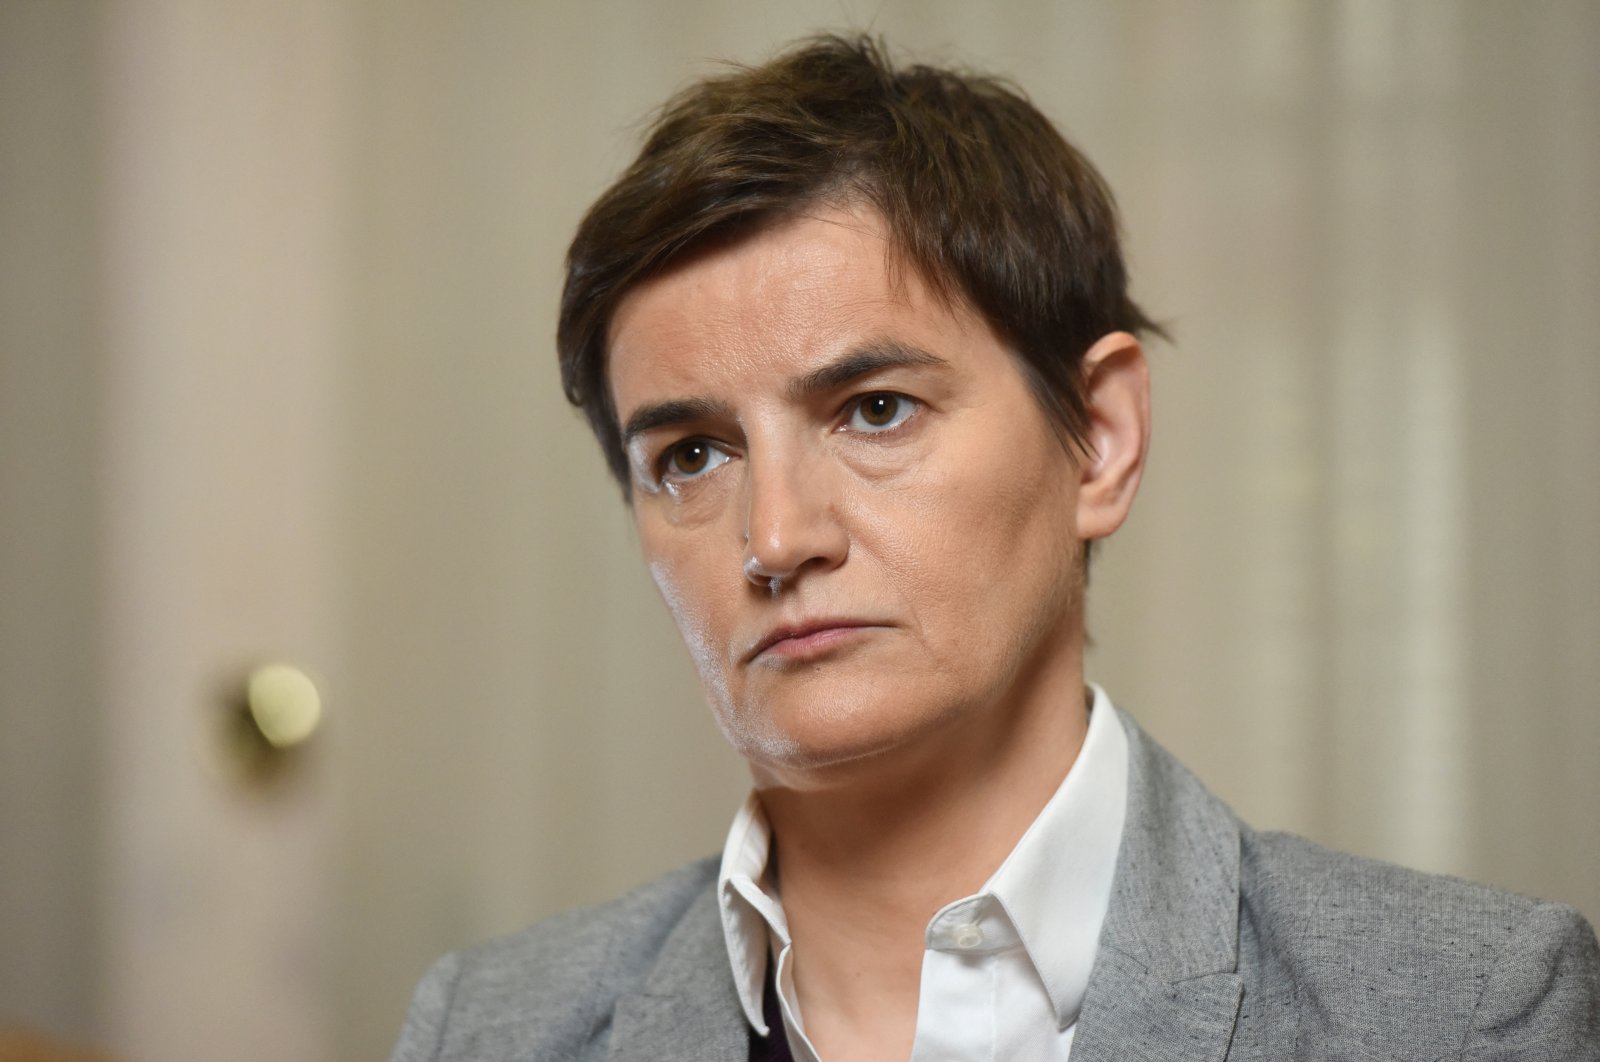 Serbian Prime Minister Ana Brnabic looks on during an interview with Reuters in Belgrade, Serbia, Jan. 11, 2022. (Reuters File Photo)